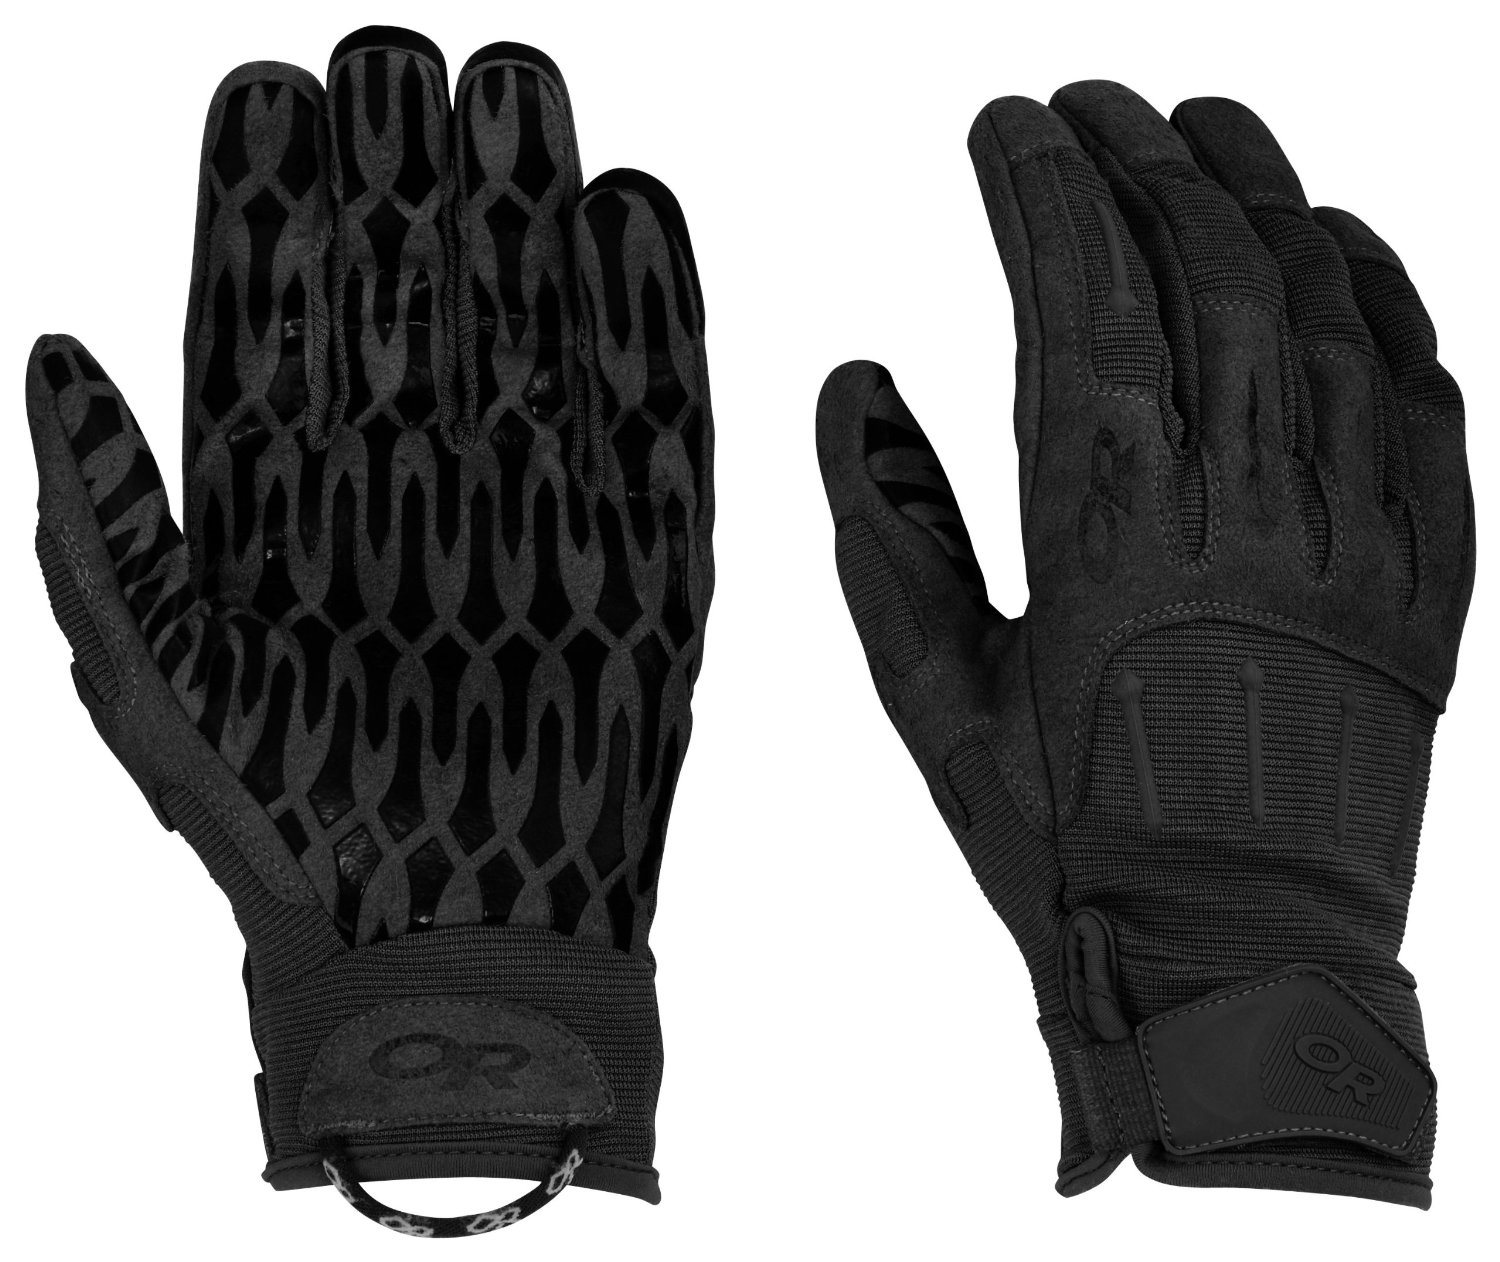 Outdoor research suppressor gloves